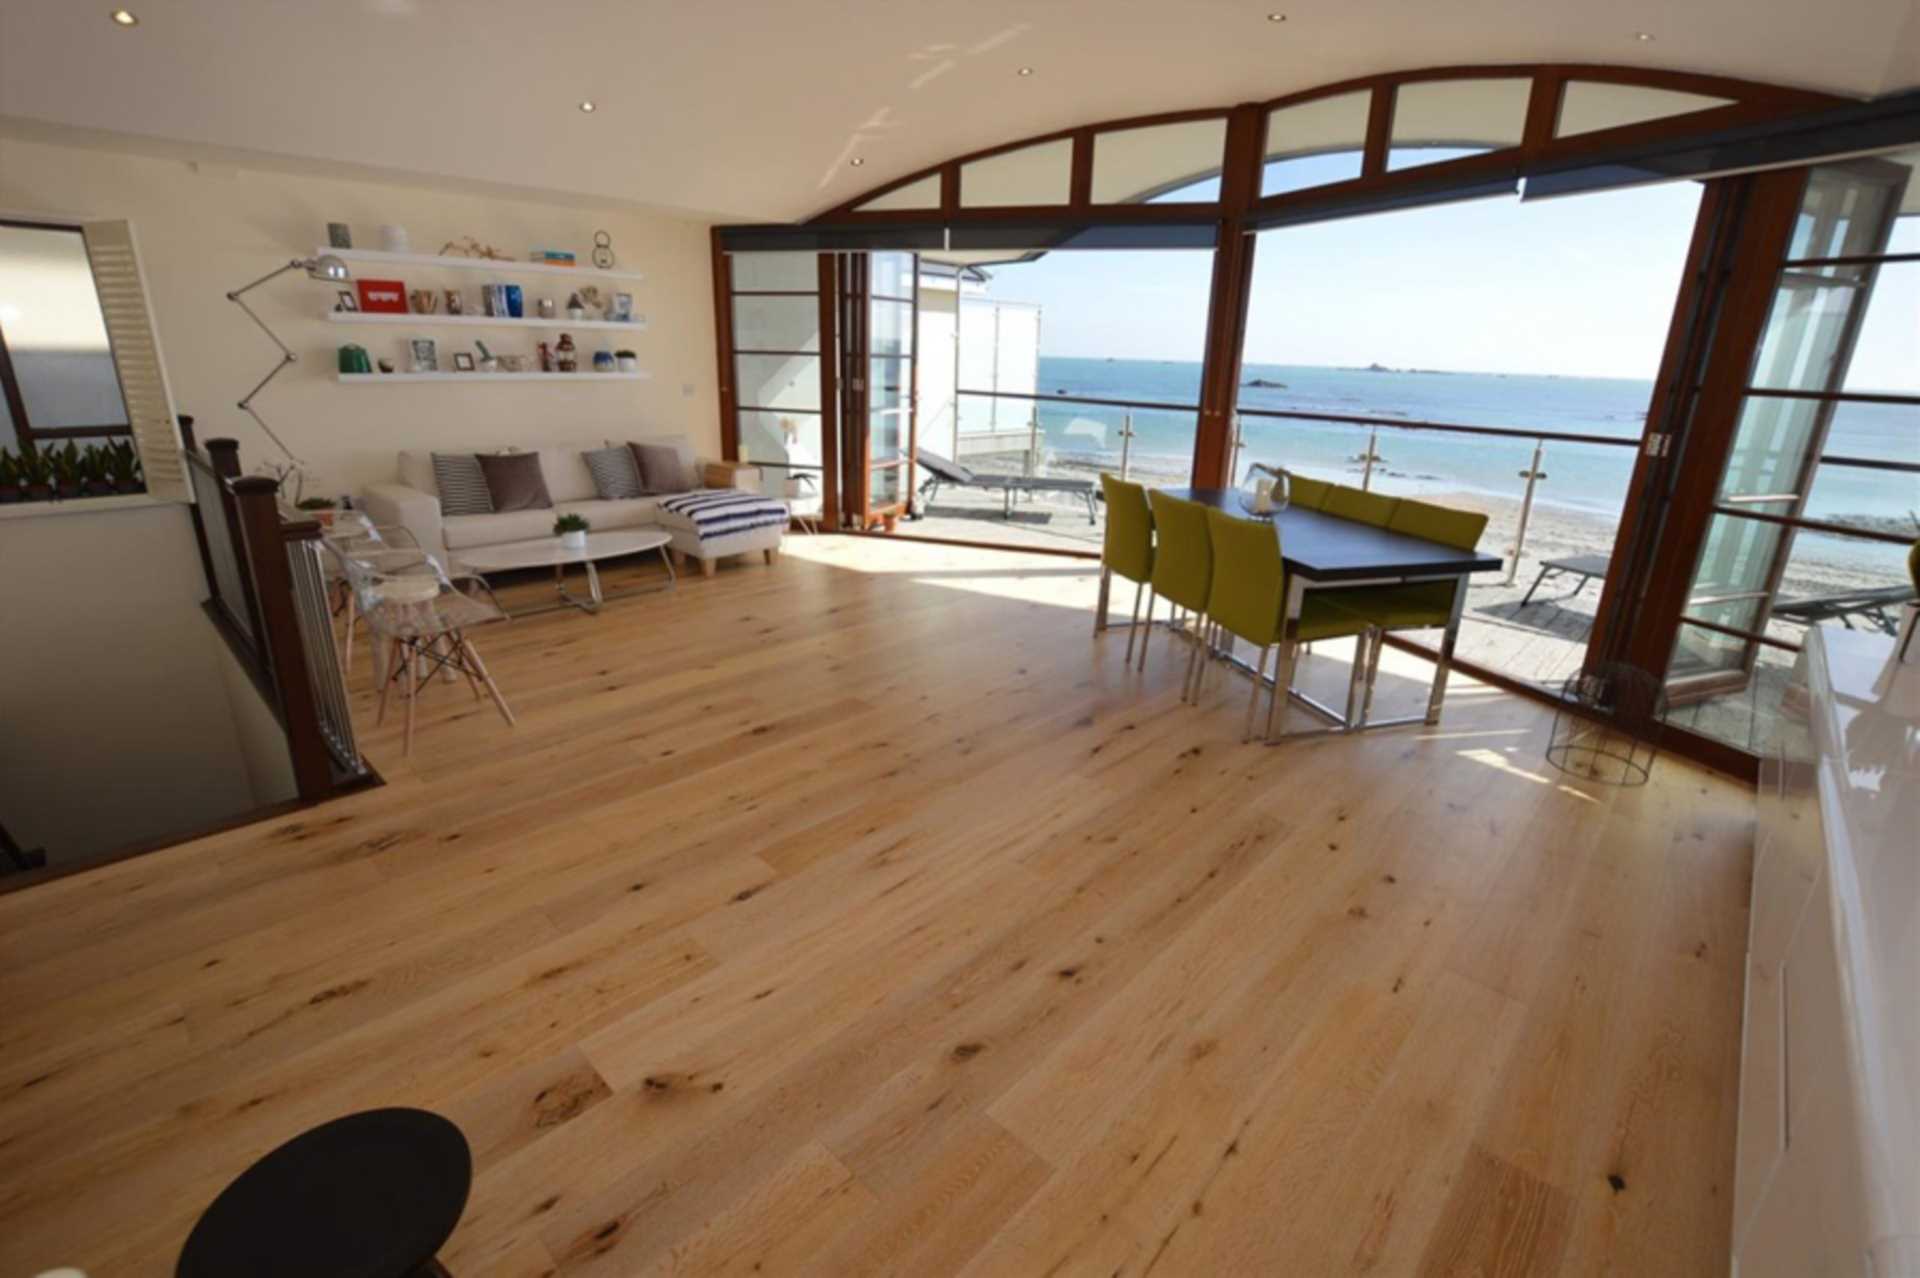 STUNNING 3 BEDROOM BEACH HOUSE TO RENT FROM JUNE JUST IN TIME FOR SUMMER ON THE BEACH, Image 2